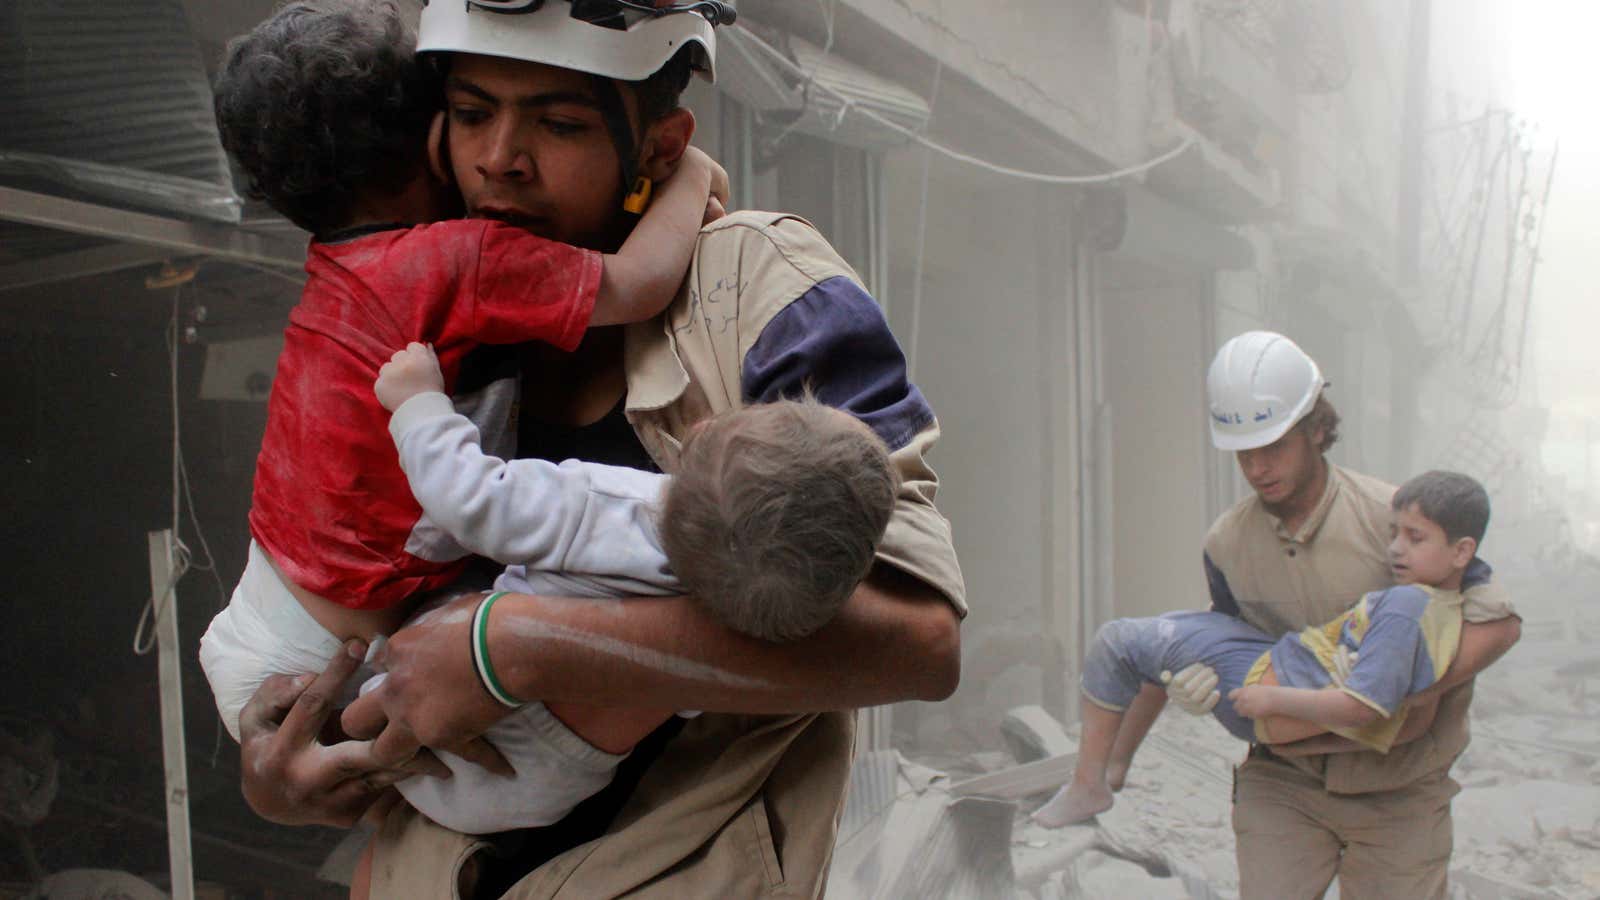 The White Helmets doing essential work.